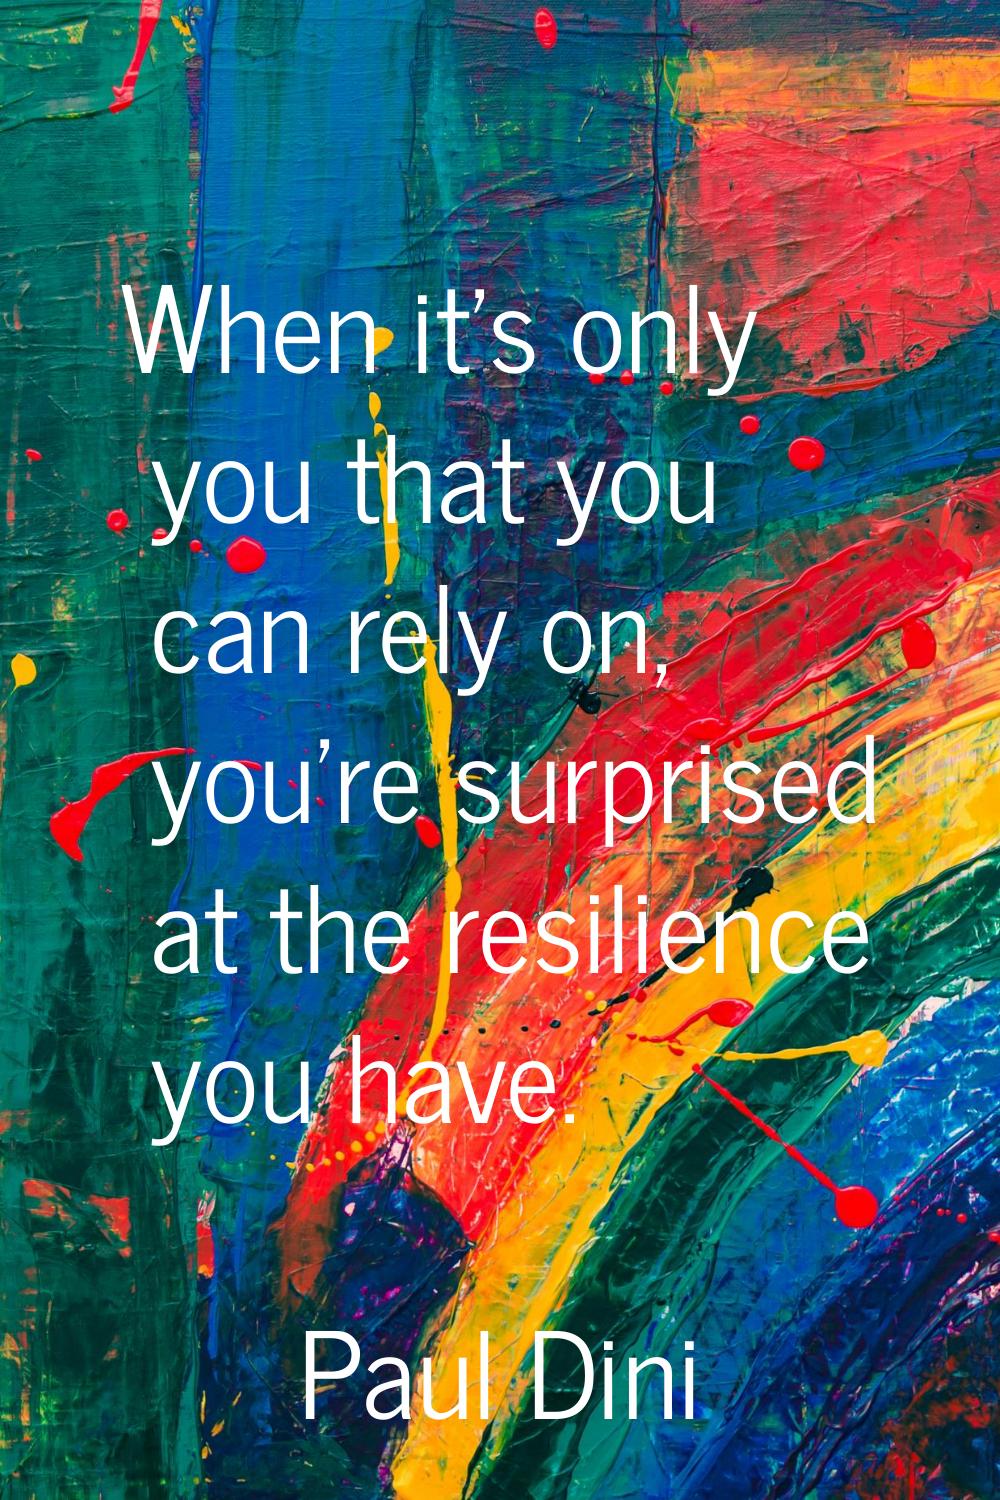 When it's only you that you can rely on, you're surprised at the resilience you have.